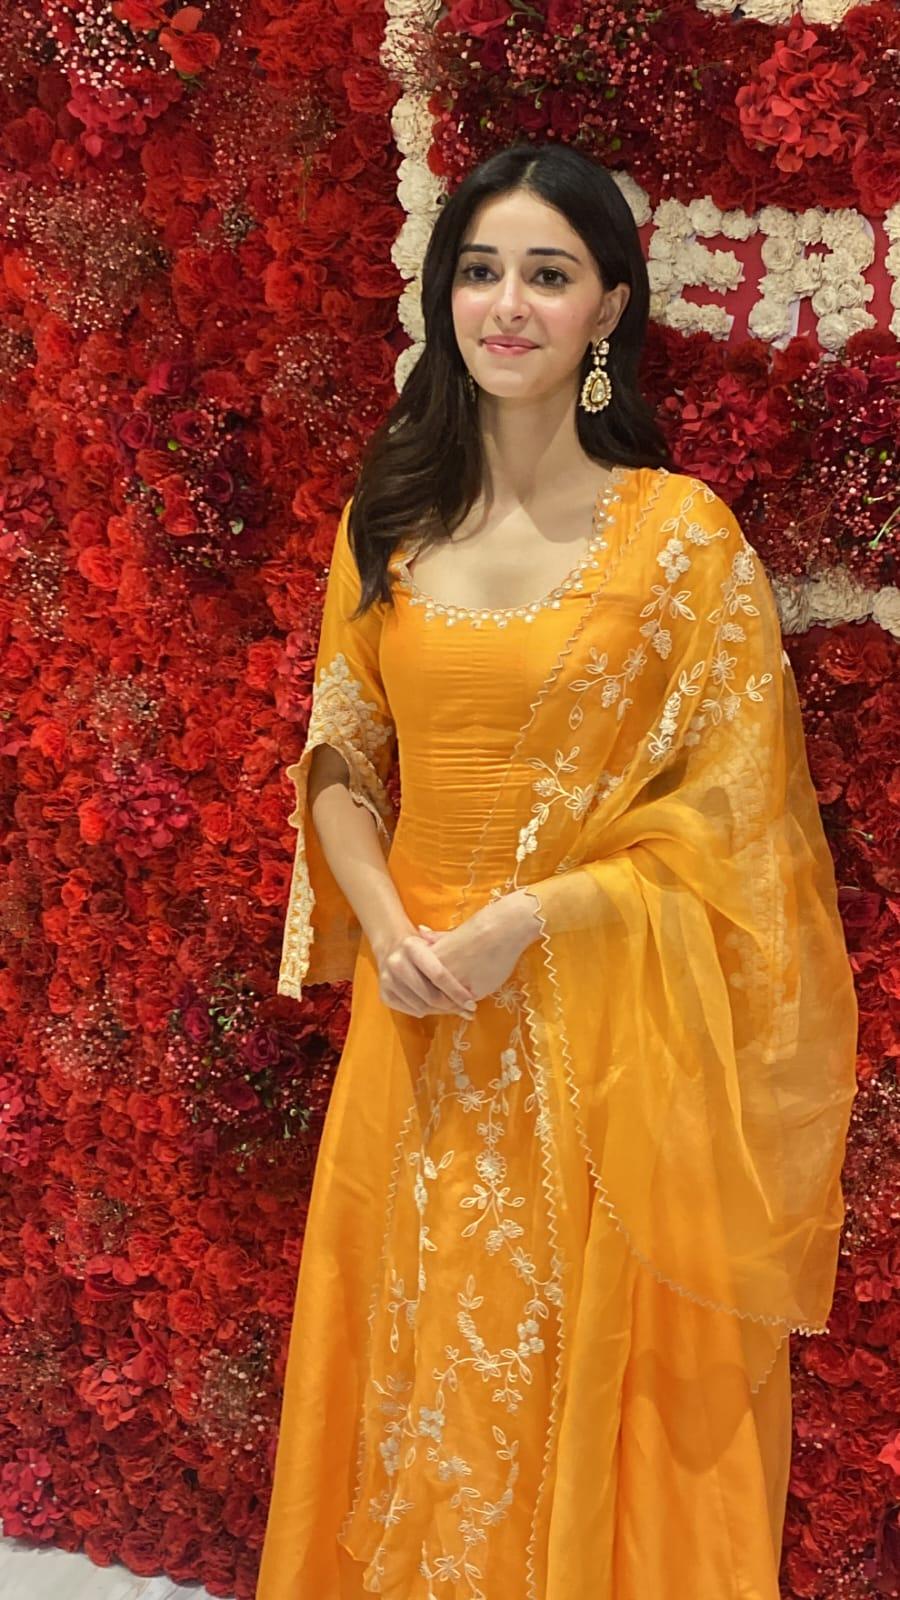 Ananya Panday was spotted at the T-series office as she went to take blessing from Ganpati Bappa